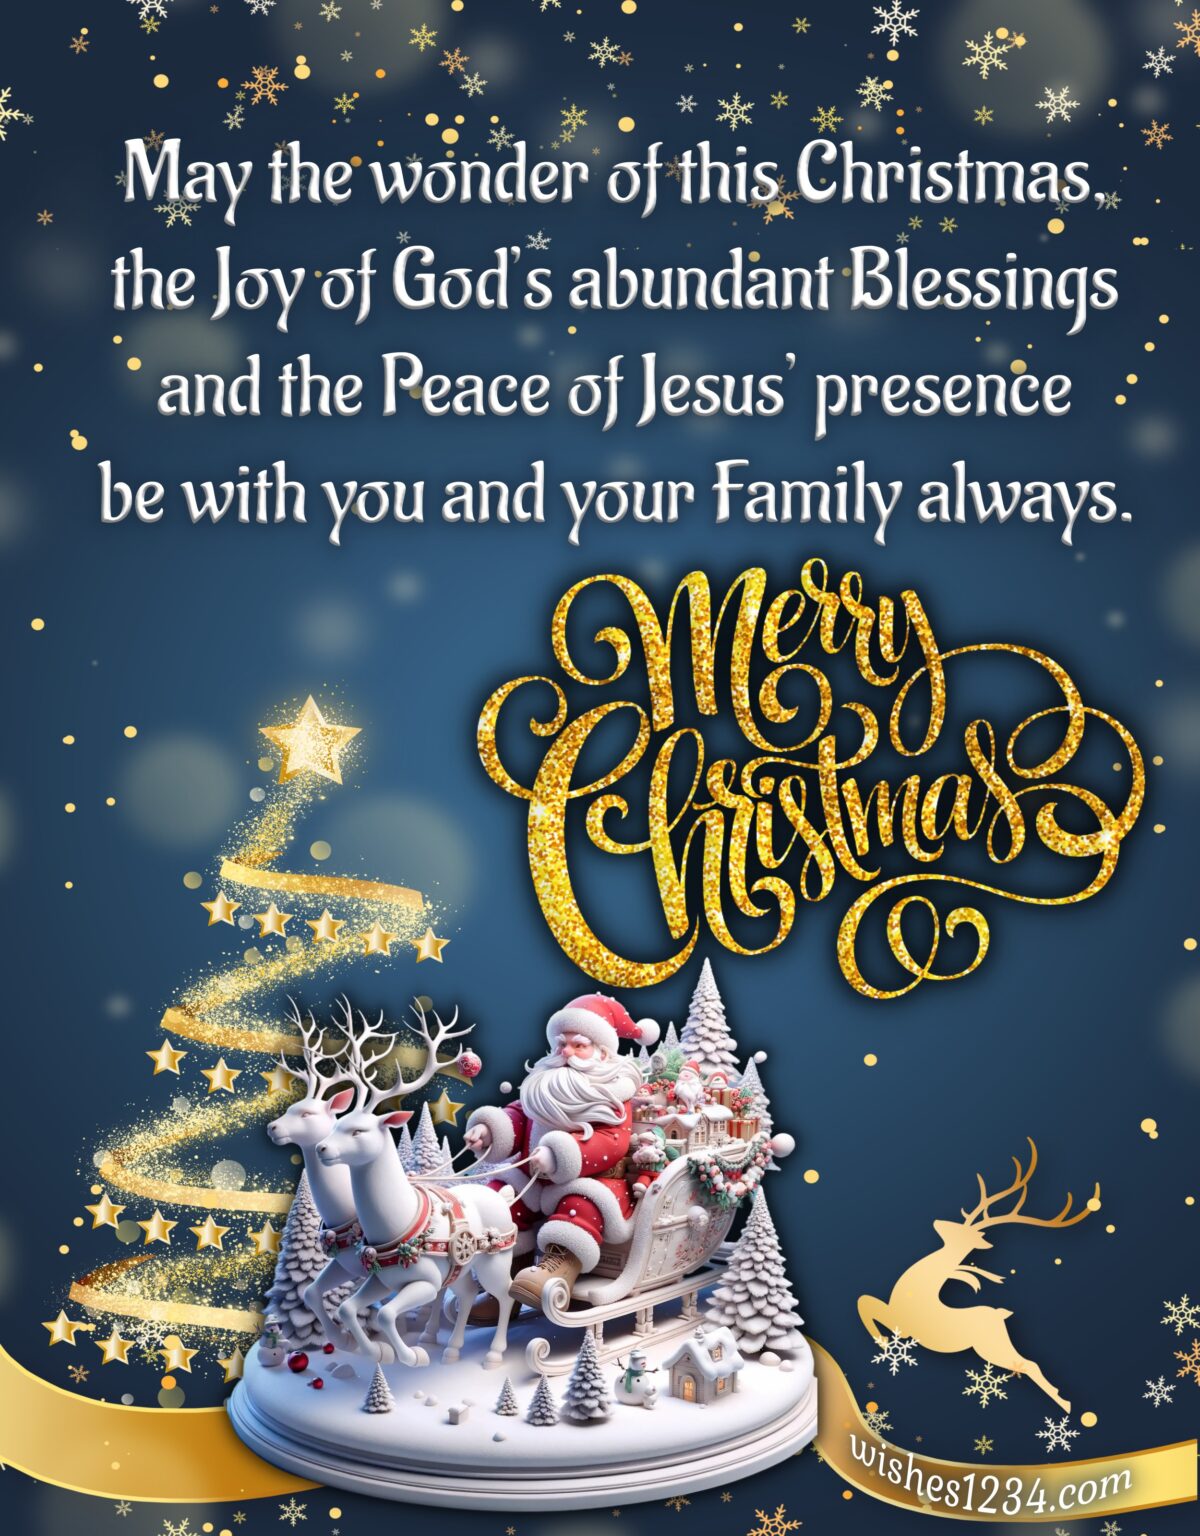 100+ Merry Christmas wishes with beautiful images